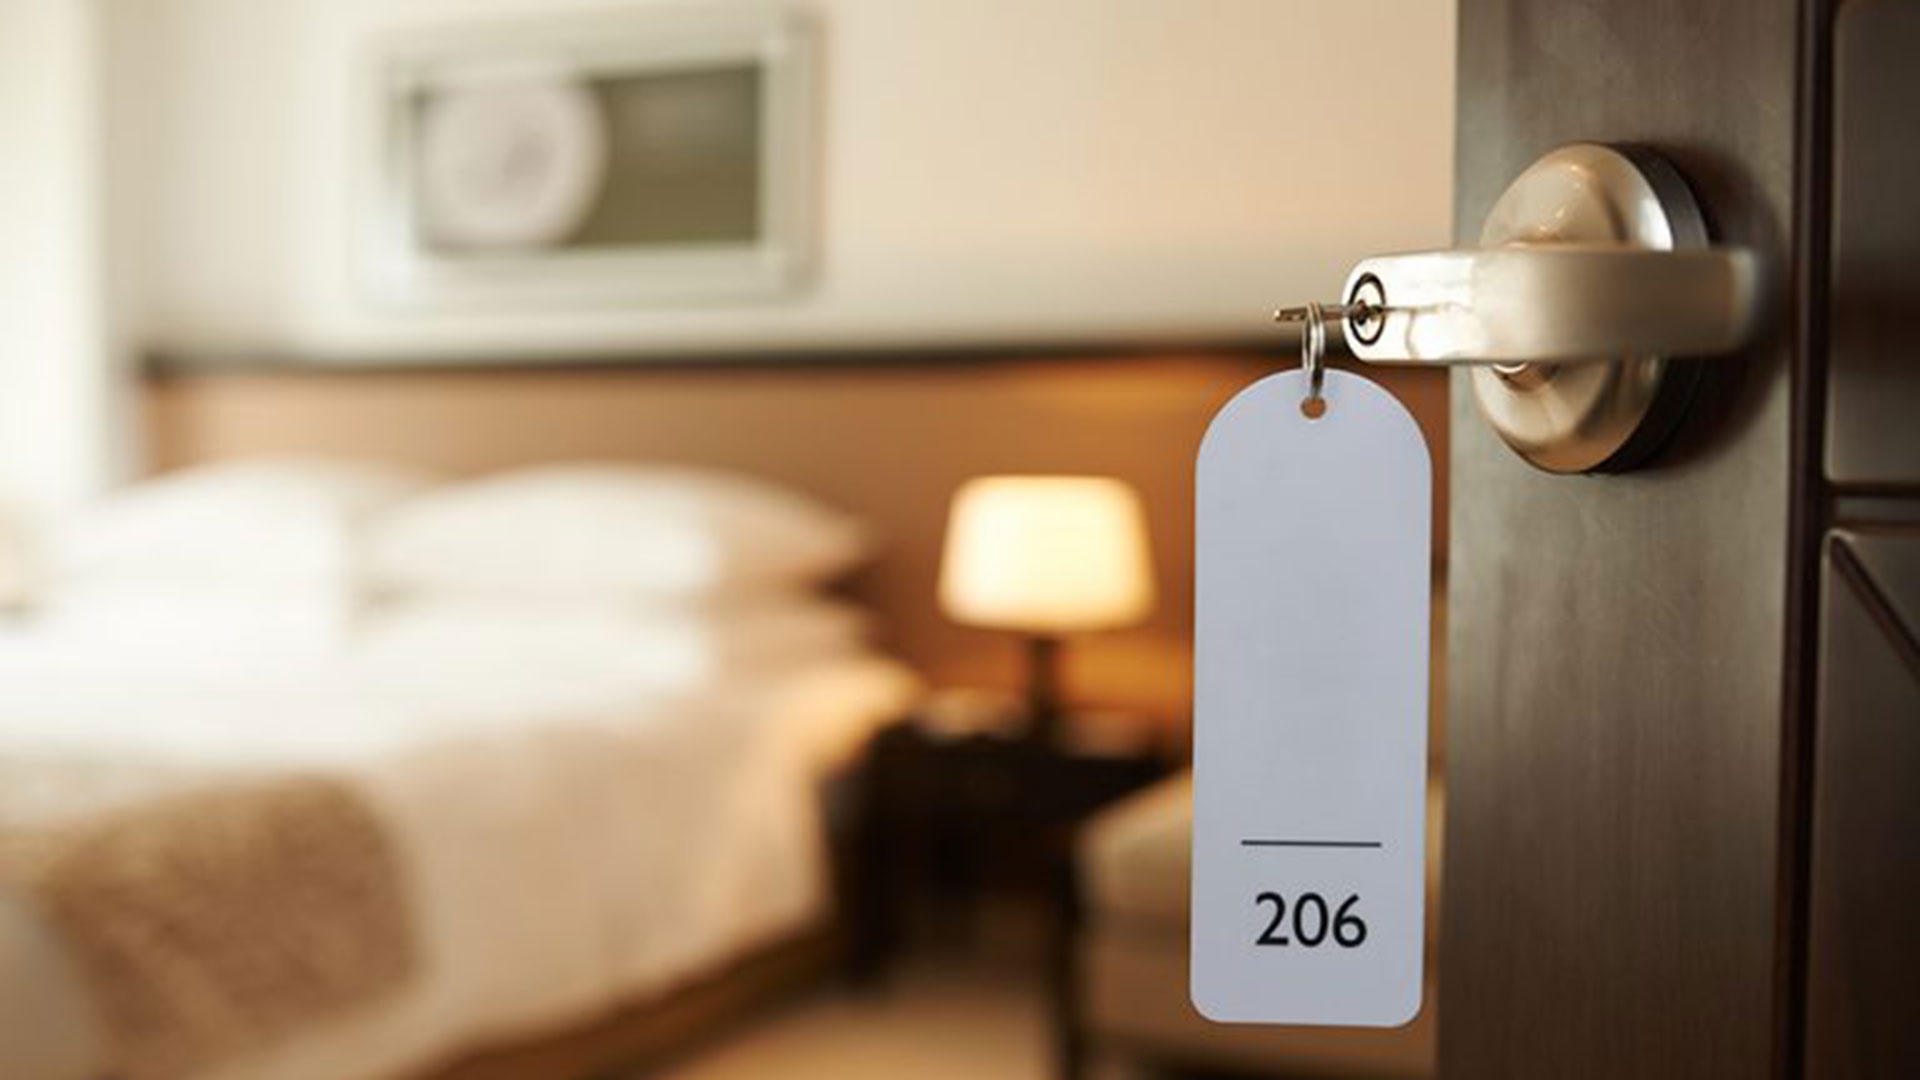 Number of small budget hotels dwindling